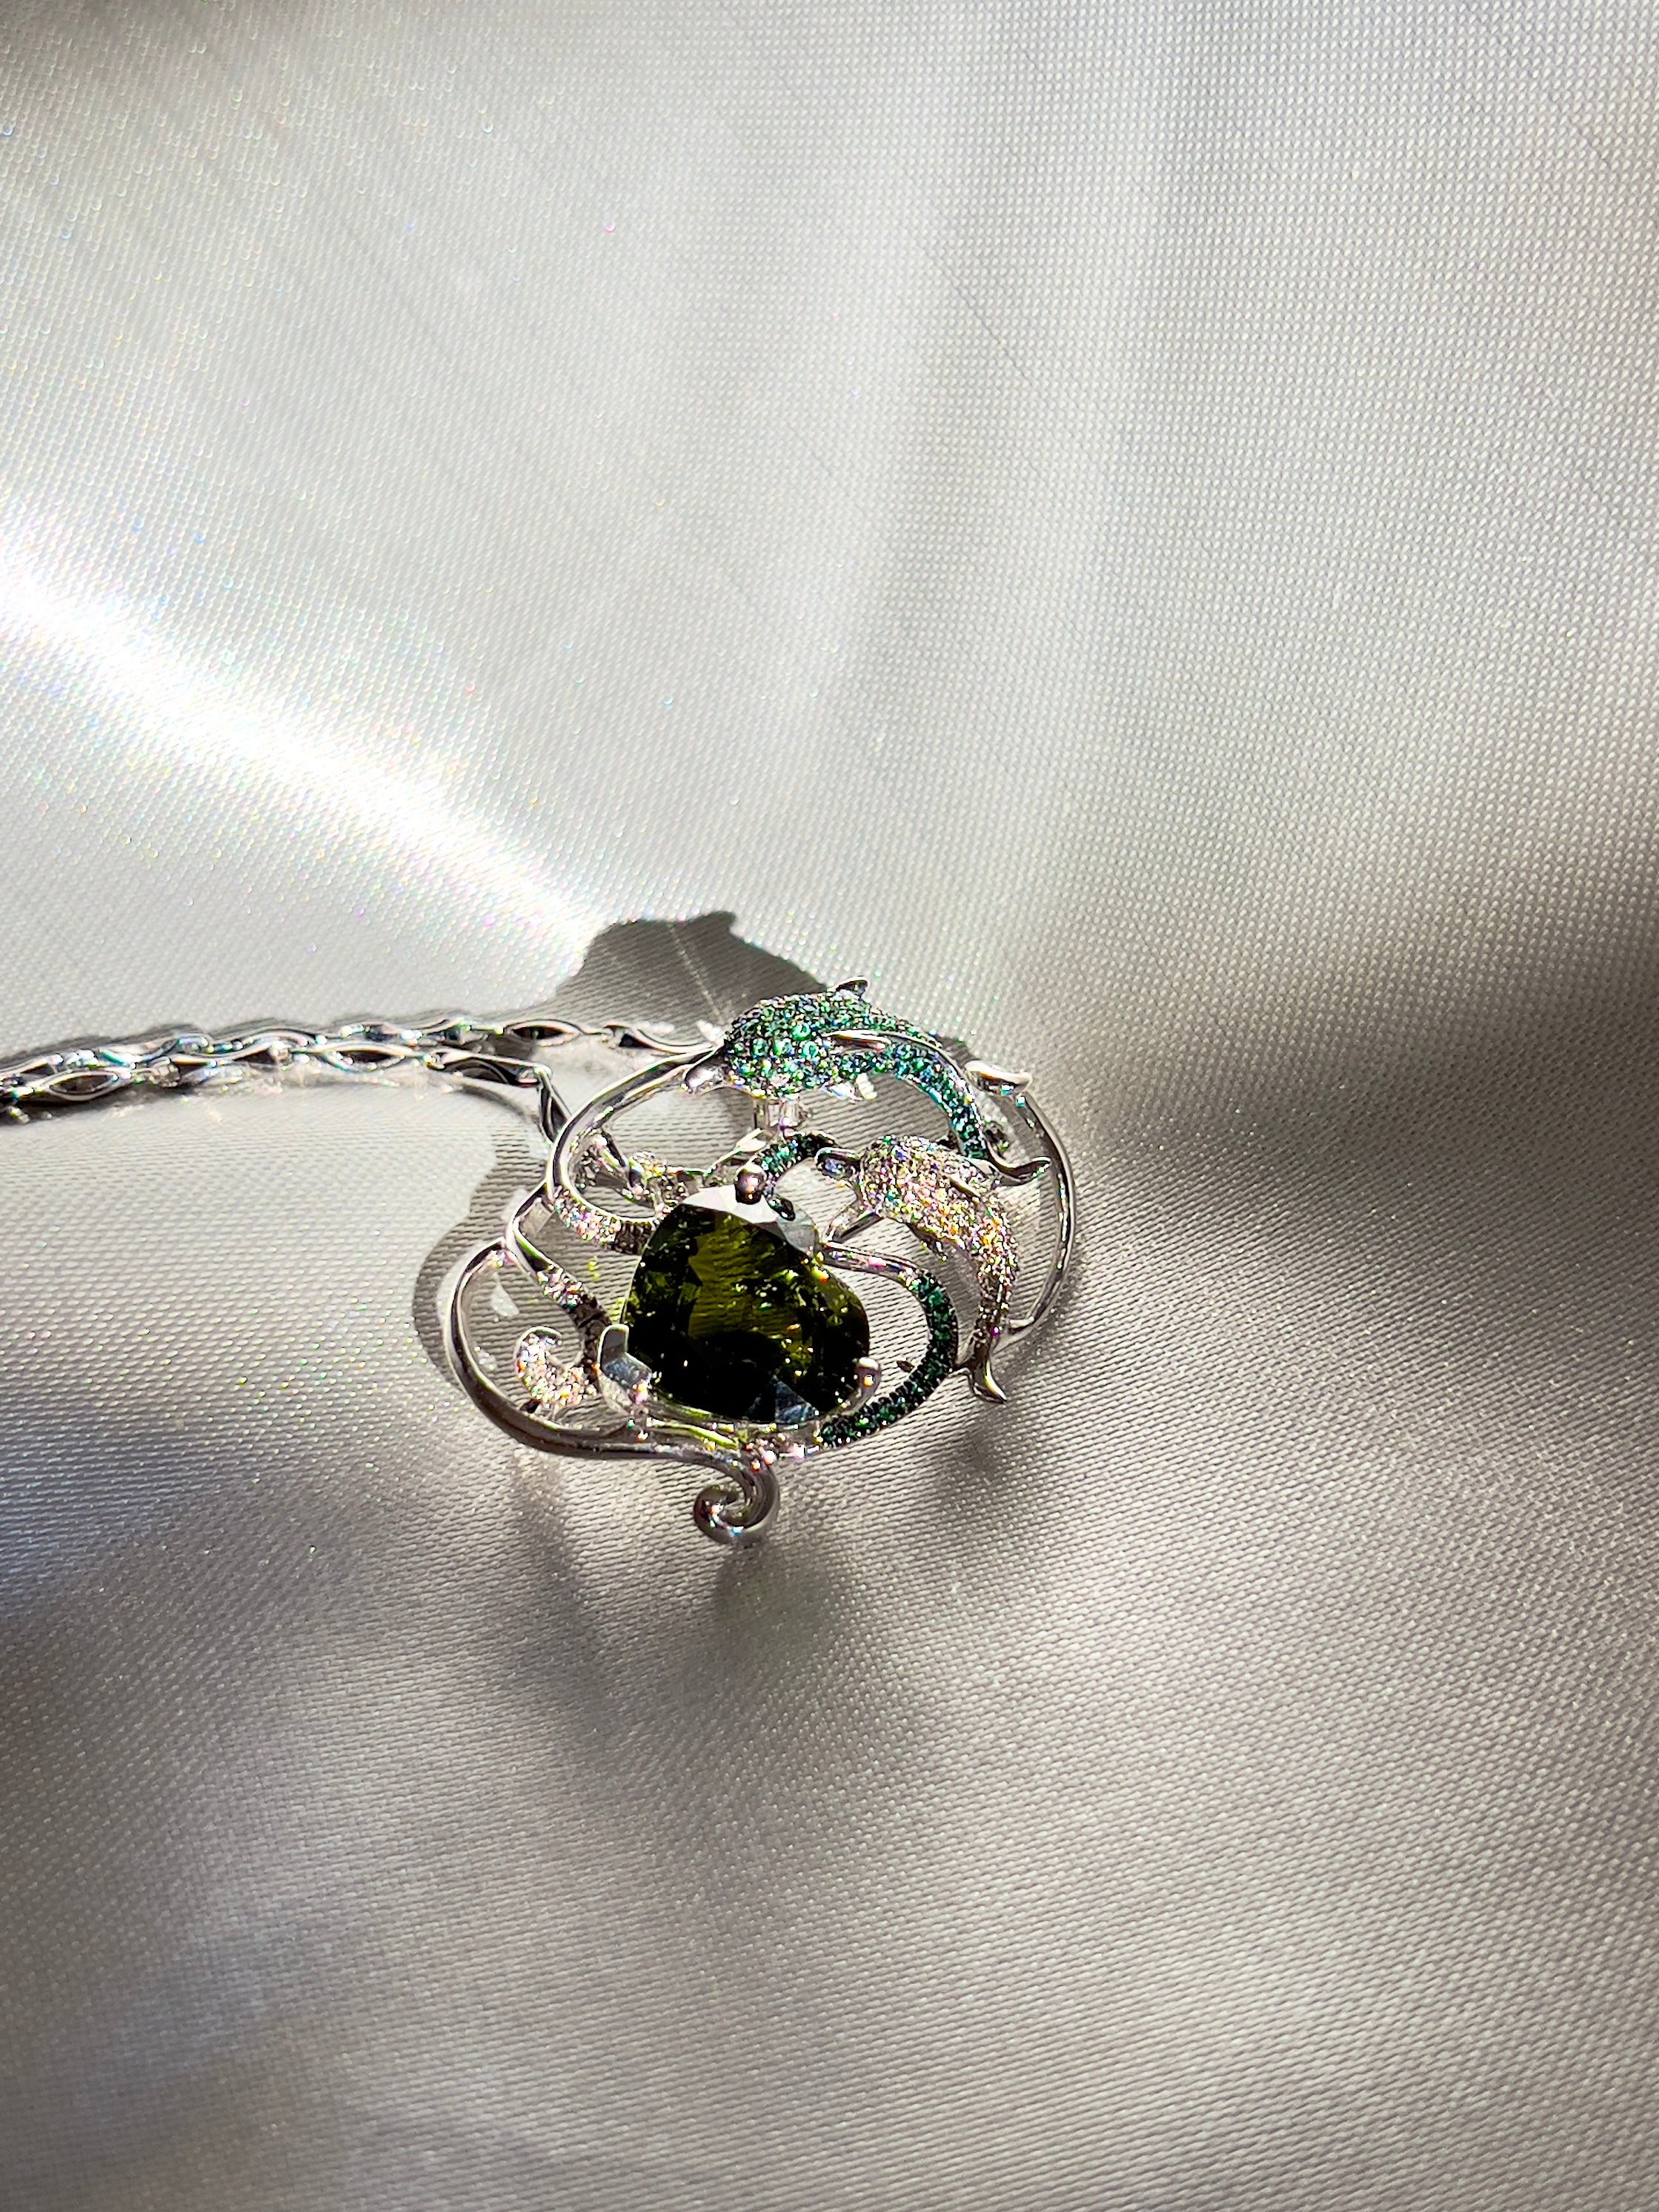 Natural 7.5Ct Lagoon Green Tourmaline with Tsavorite and Diamond Dolphins Pendant Brooch in 18K White Gold